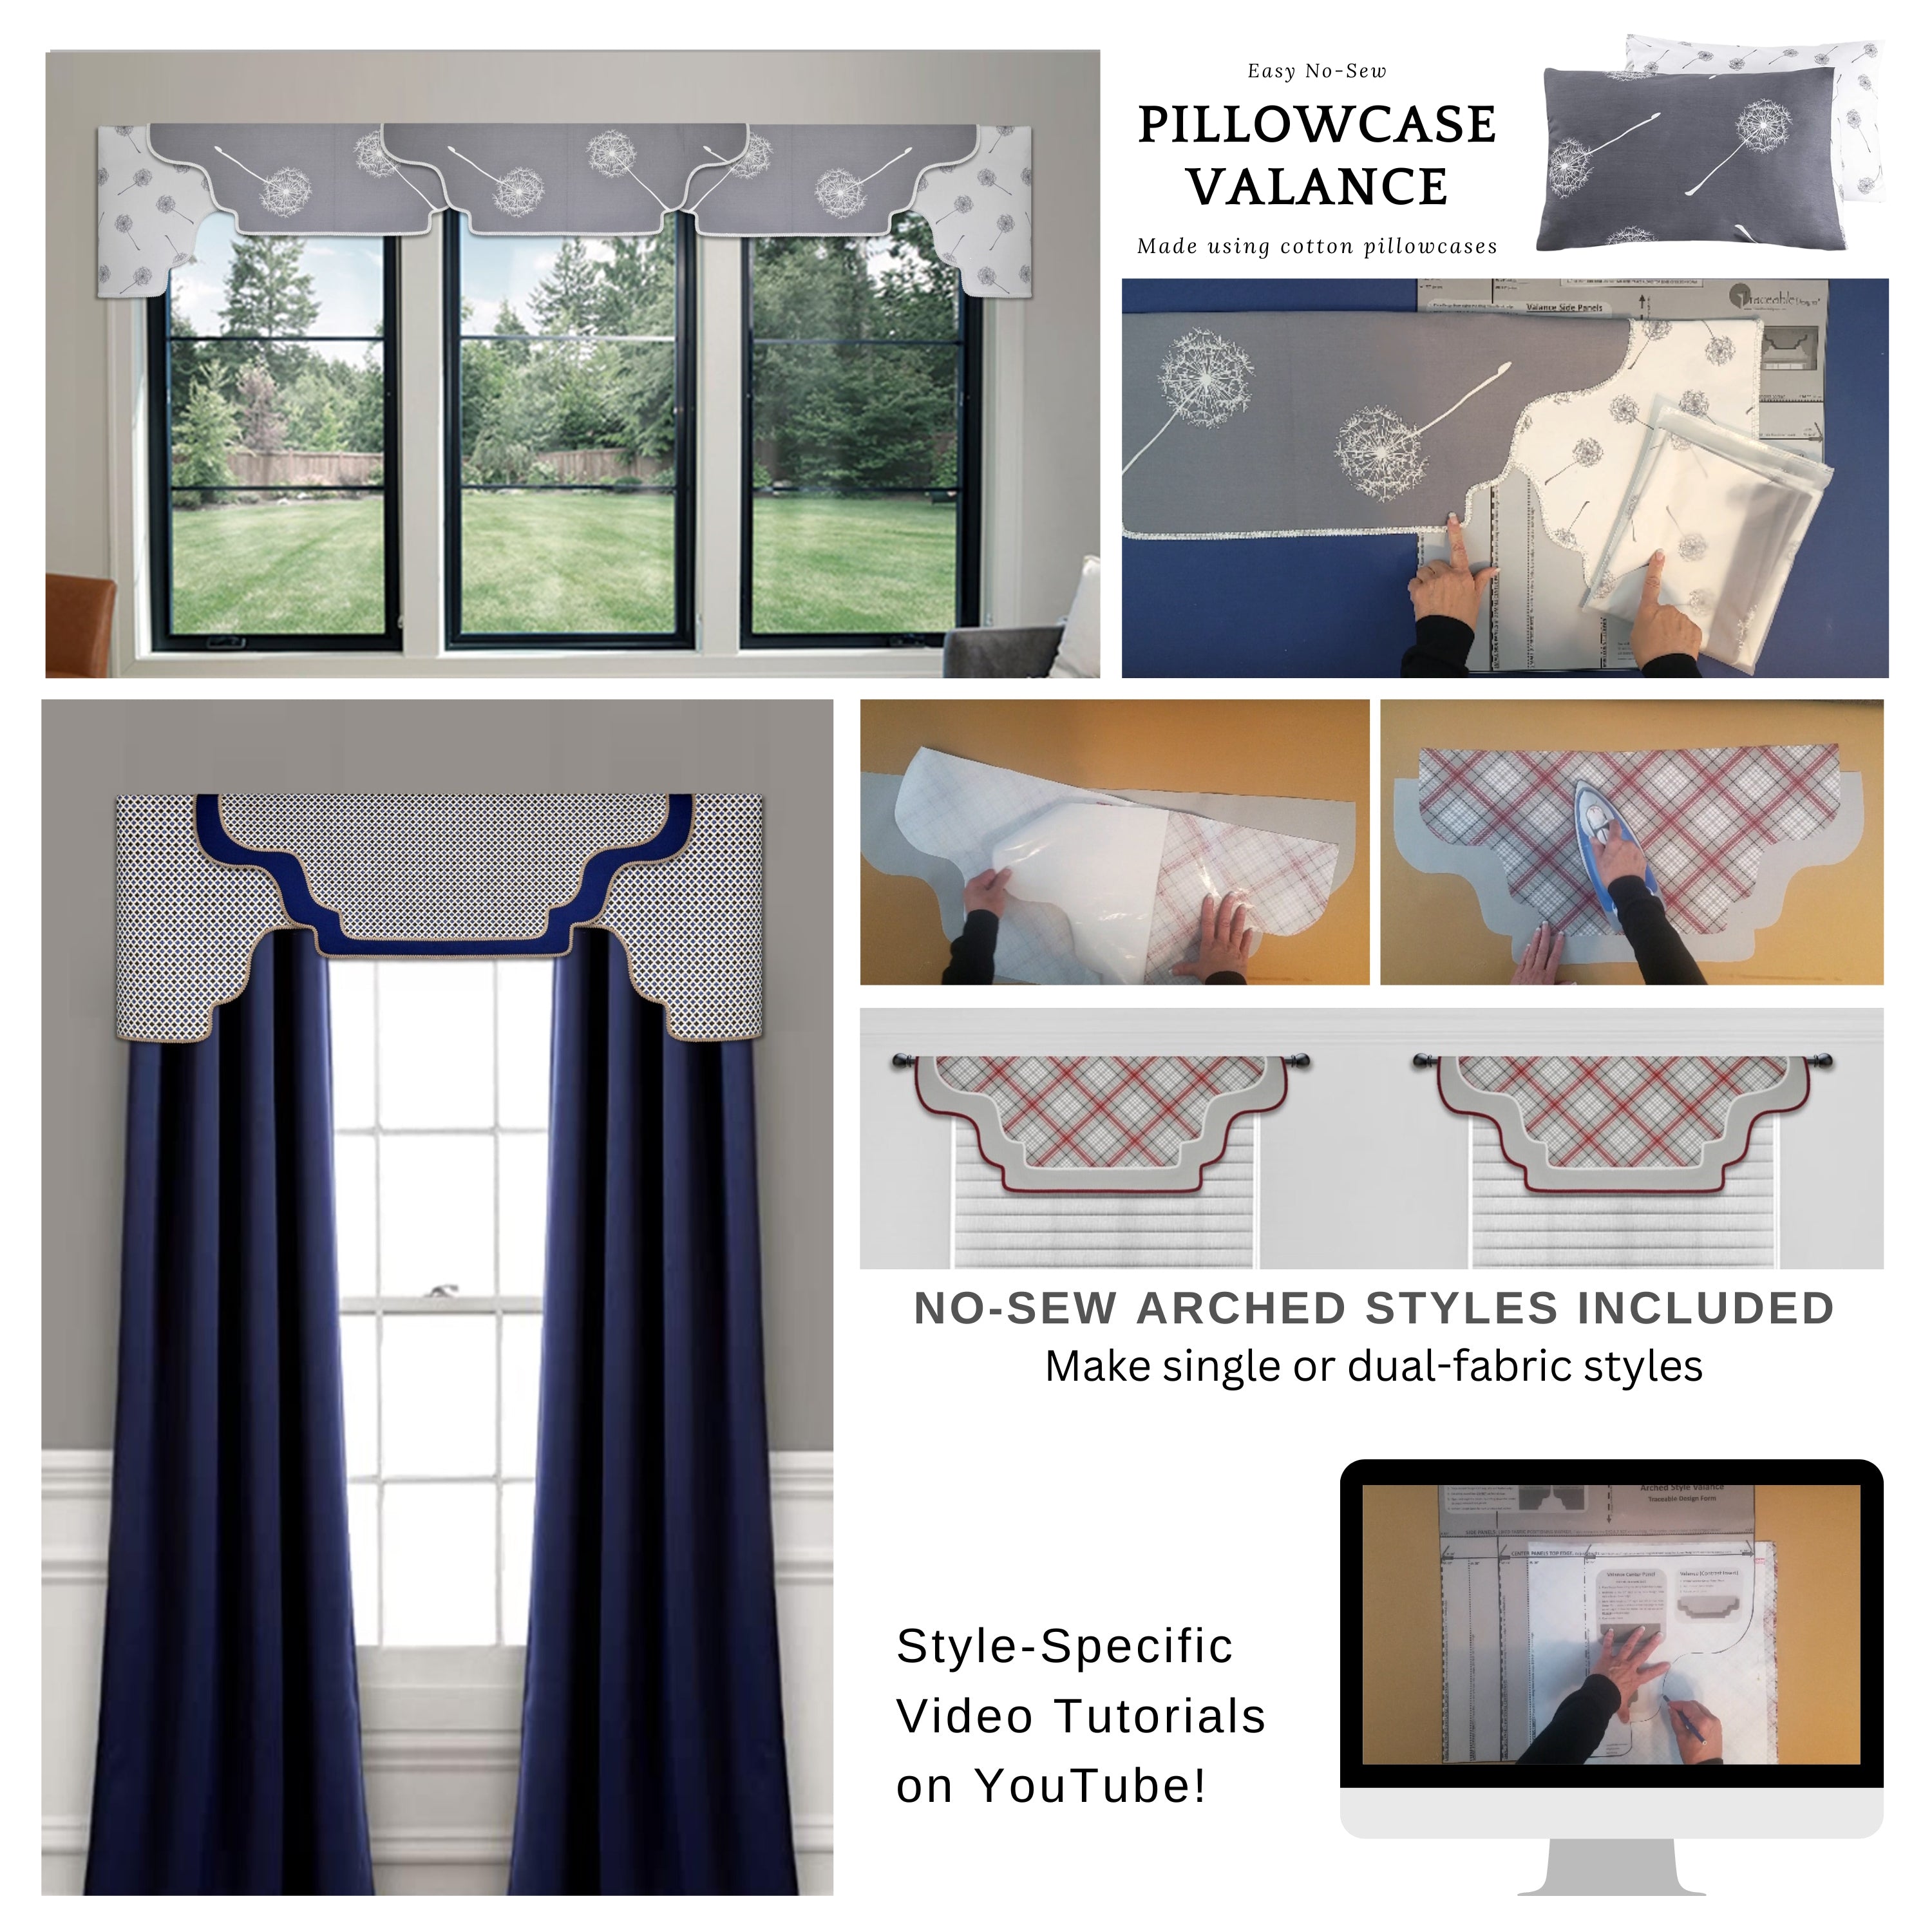 Traceable Designer DIY no-sew valance kit includes scalloped, arched and straight styles. Make beautiful window treatments without sewing! Designed by Linda Schurr